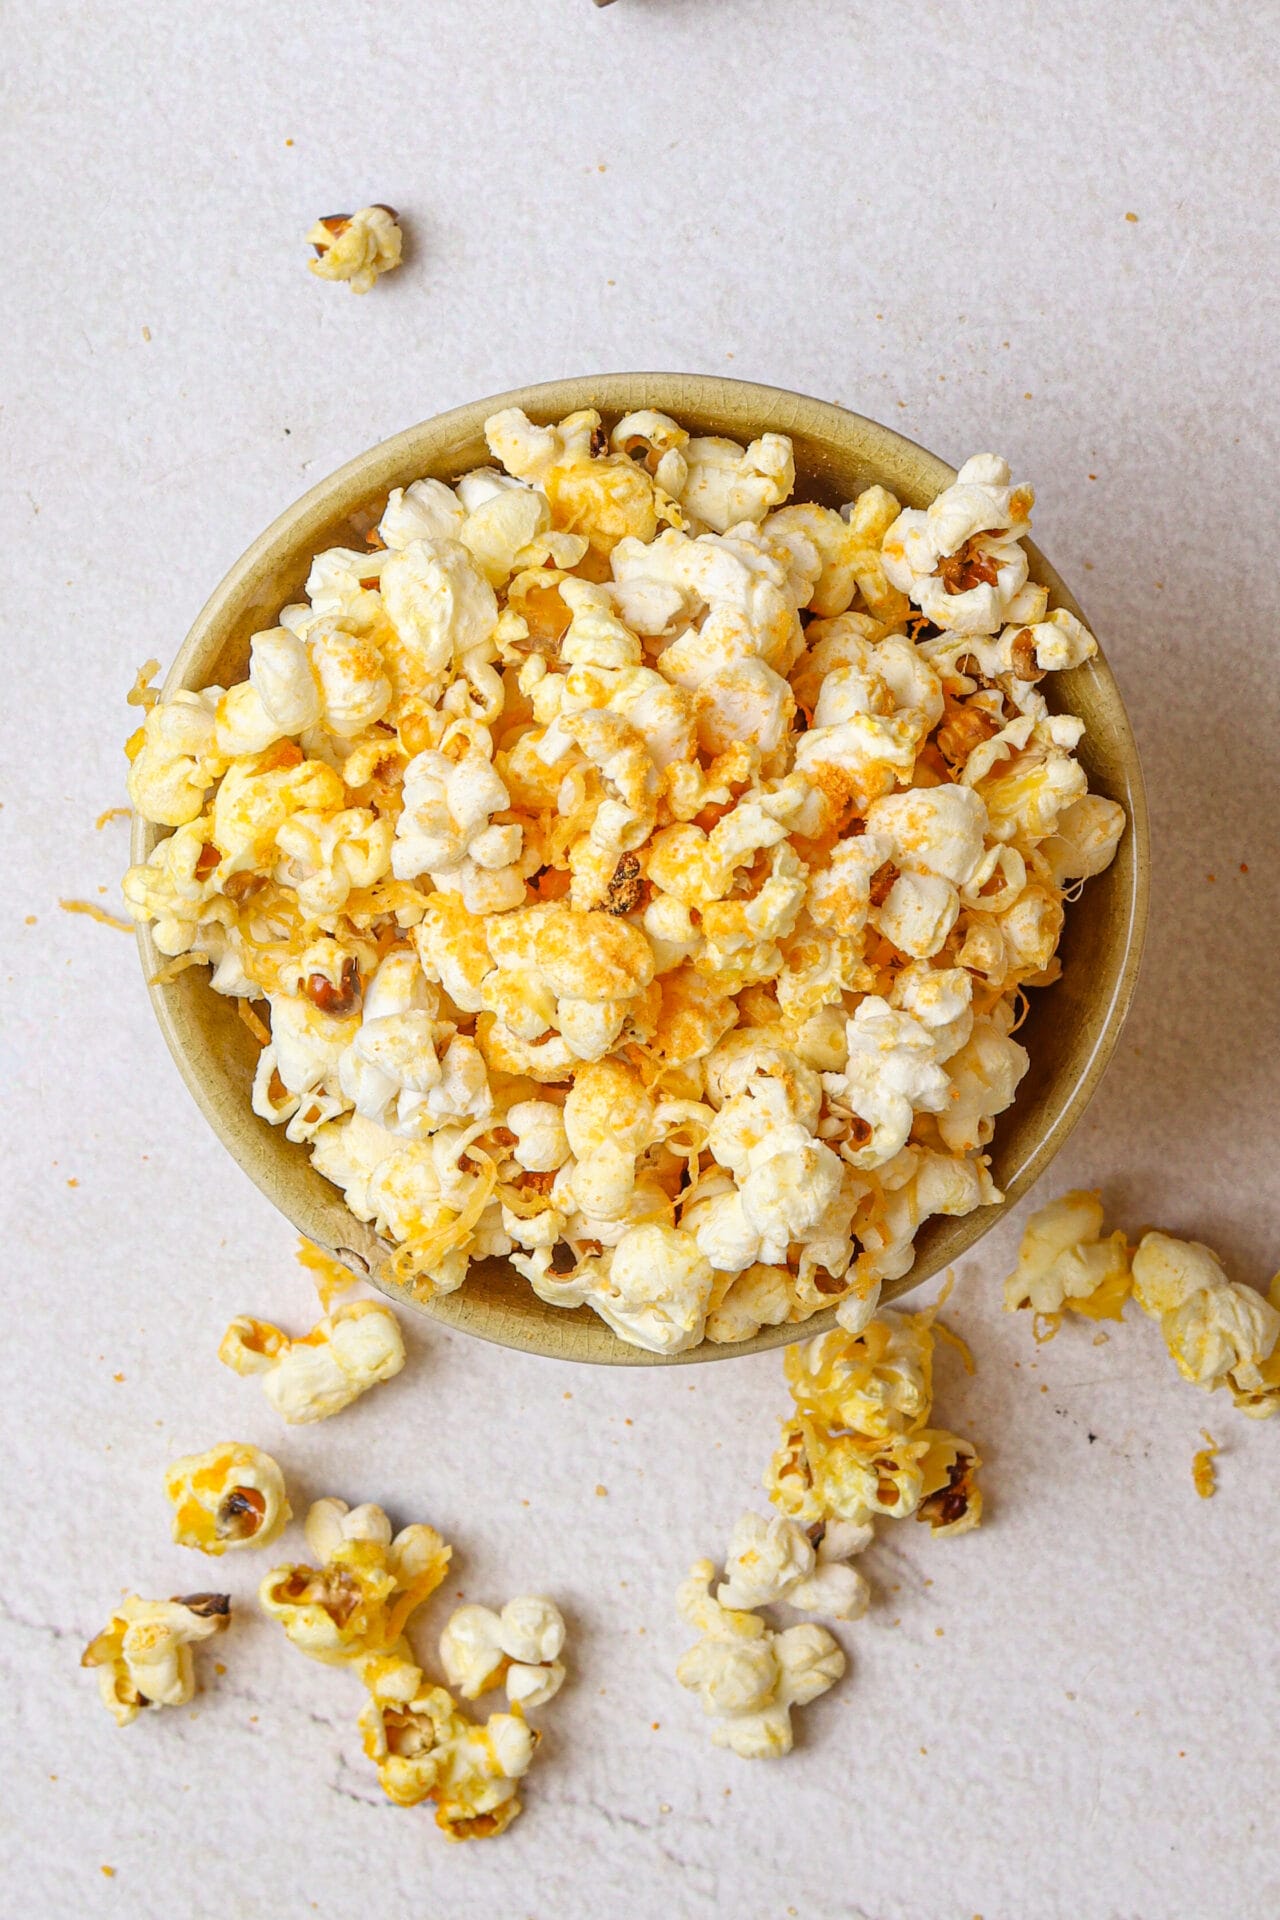 Easy Cheese Popcorn Recipe featured image below